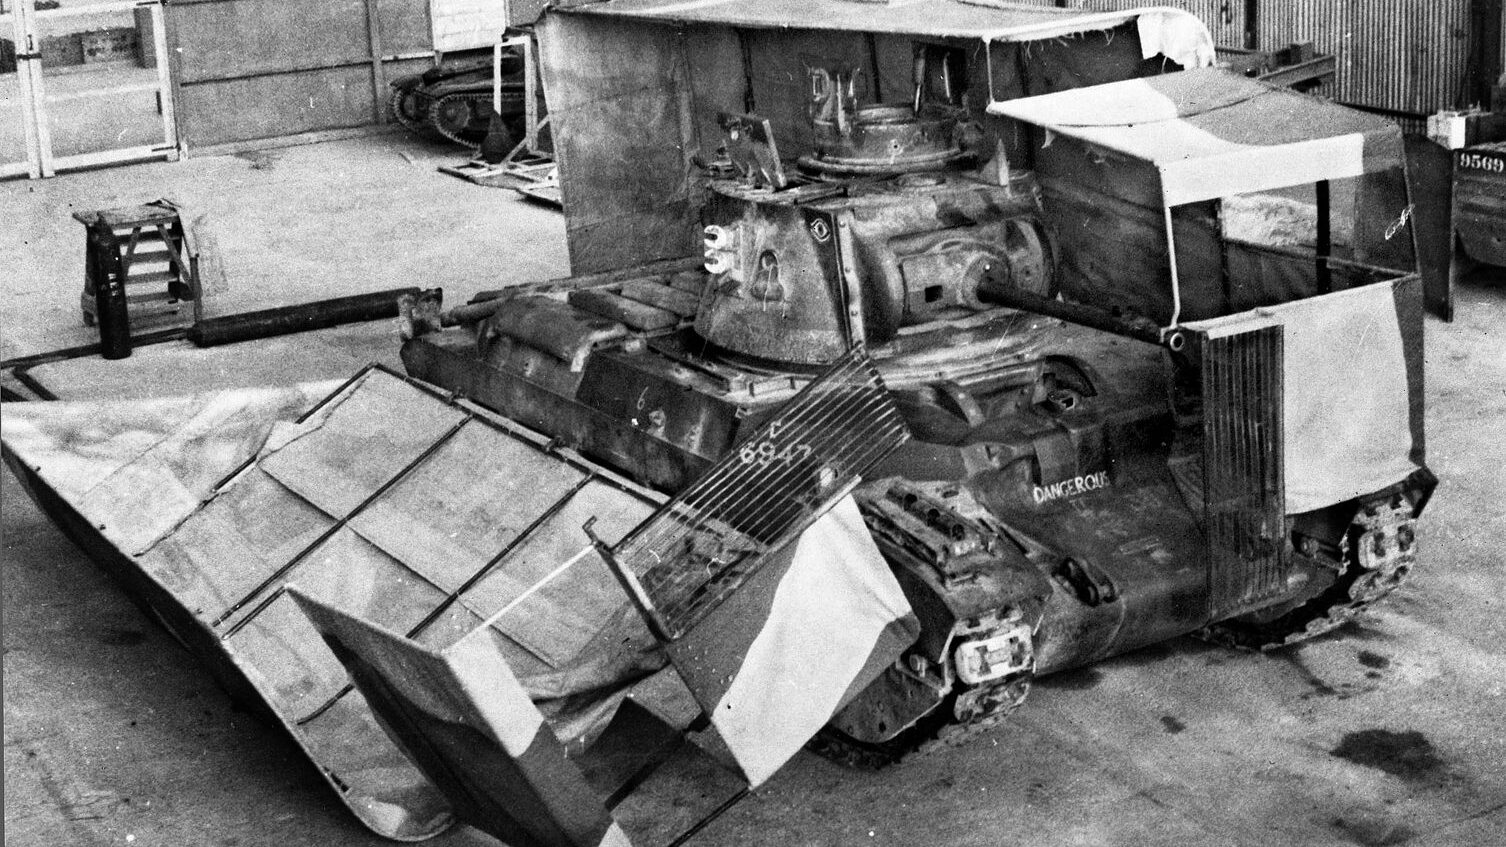 Located at Helwan, Egypt, the Middle East Command Camouflage Development and Training Center was a think tank and laboratory for the deception efforts of A Force. Taken in 1941, this photo shows a British tank with its sunshield split during vehicle servicing on the workshop floor.